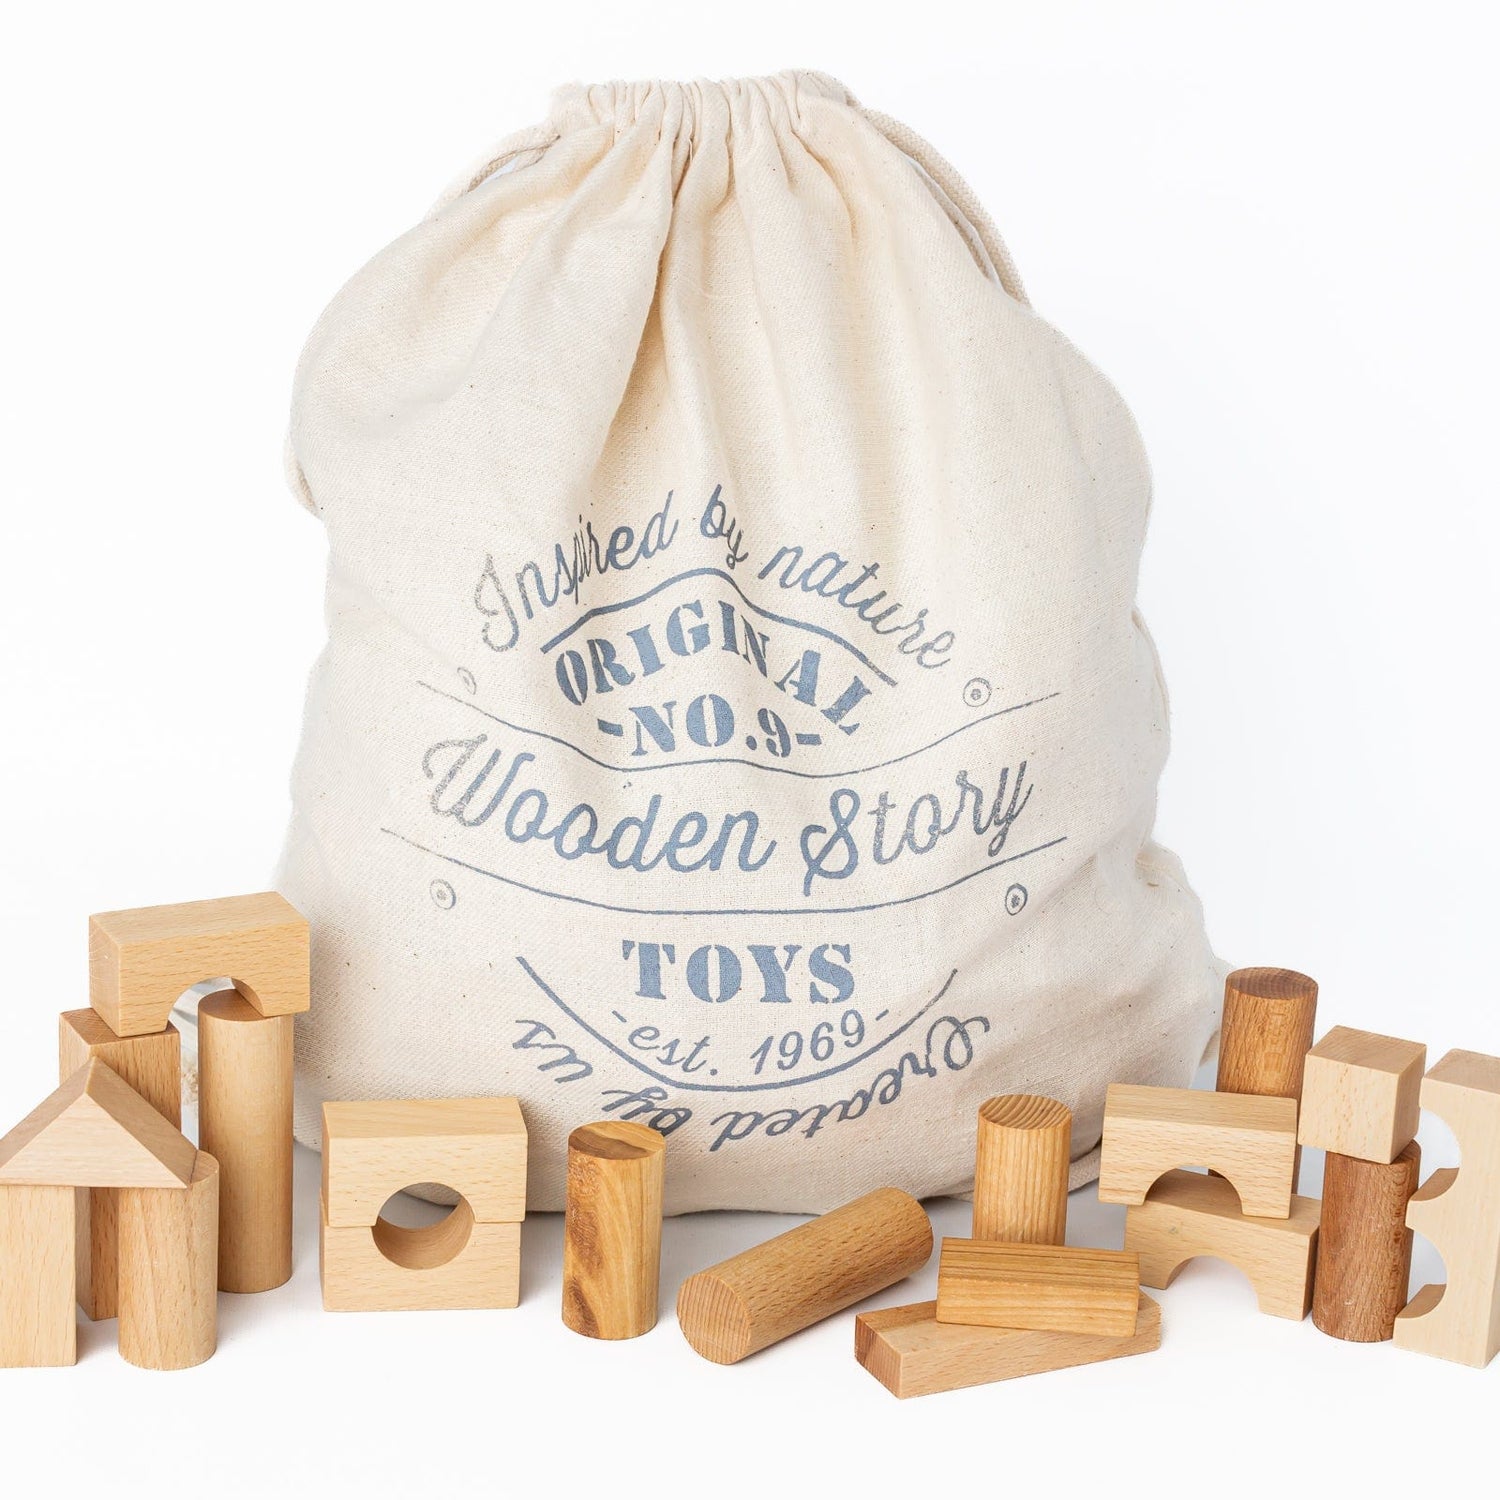 Wooden Story Building & Stacking Handmade Wooden Blocks in Sack (Set of 100 ) - Natural